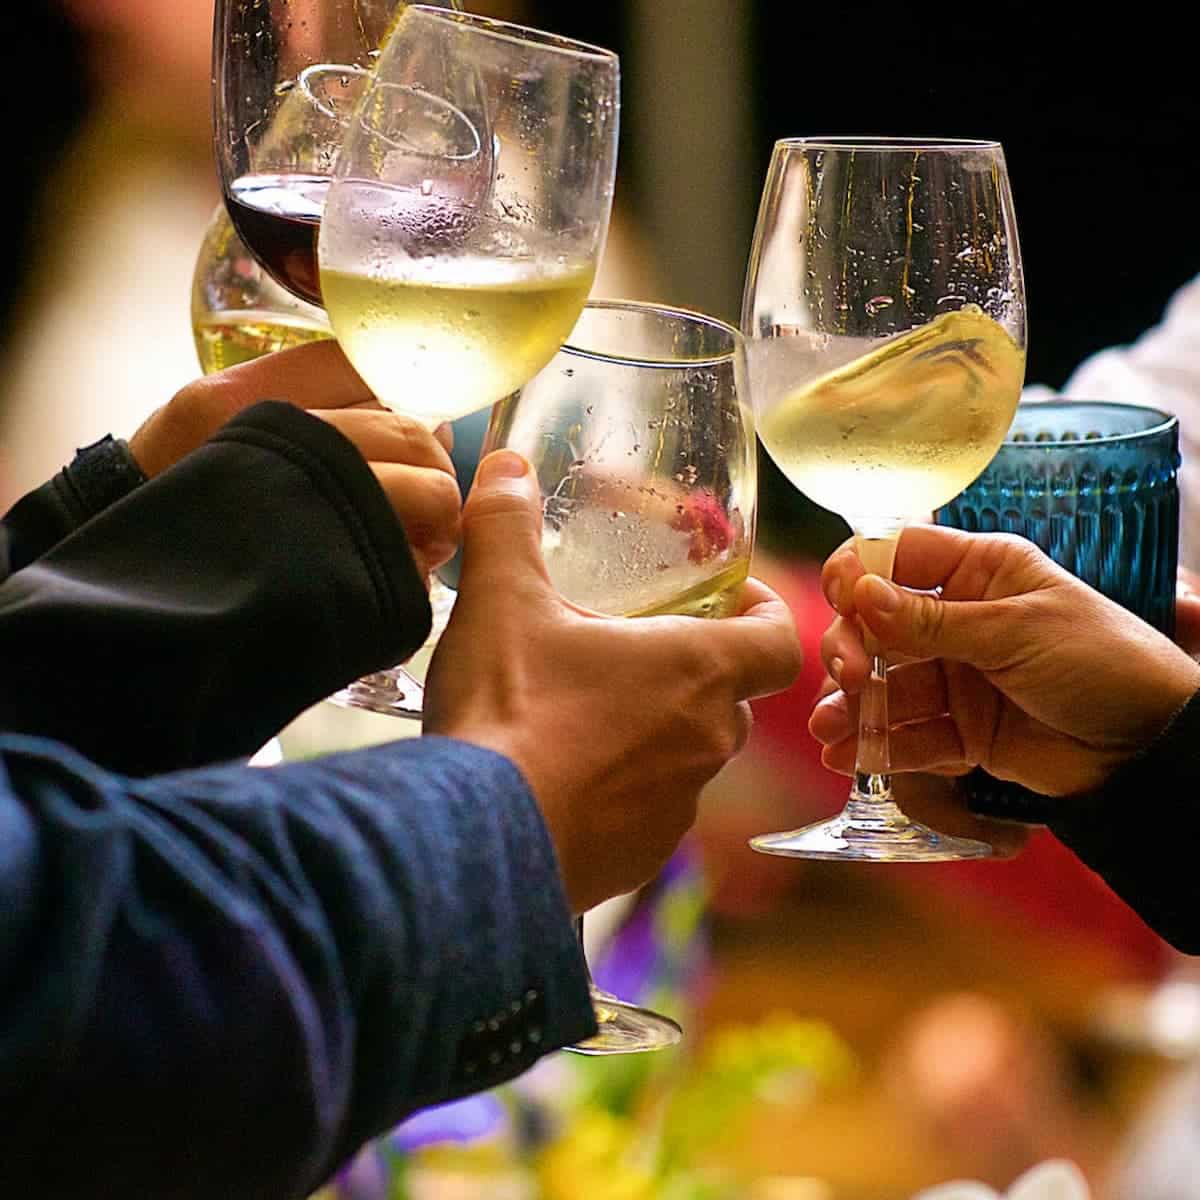 an image of several people holding wine glasses and clinking them together.